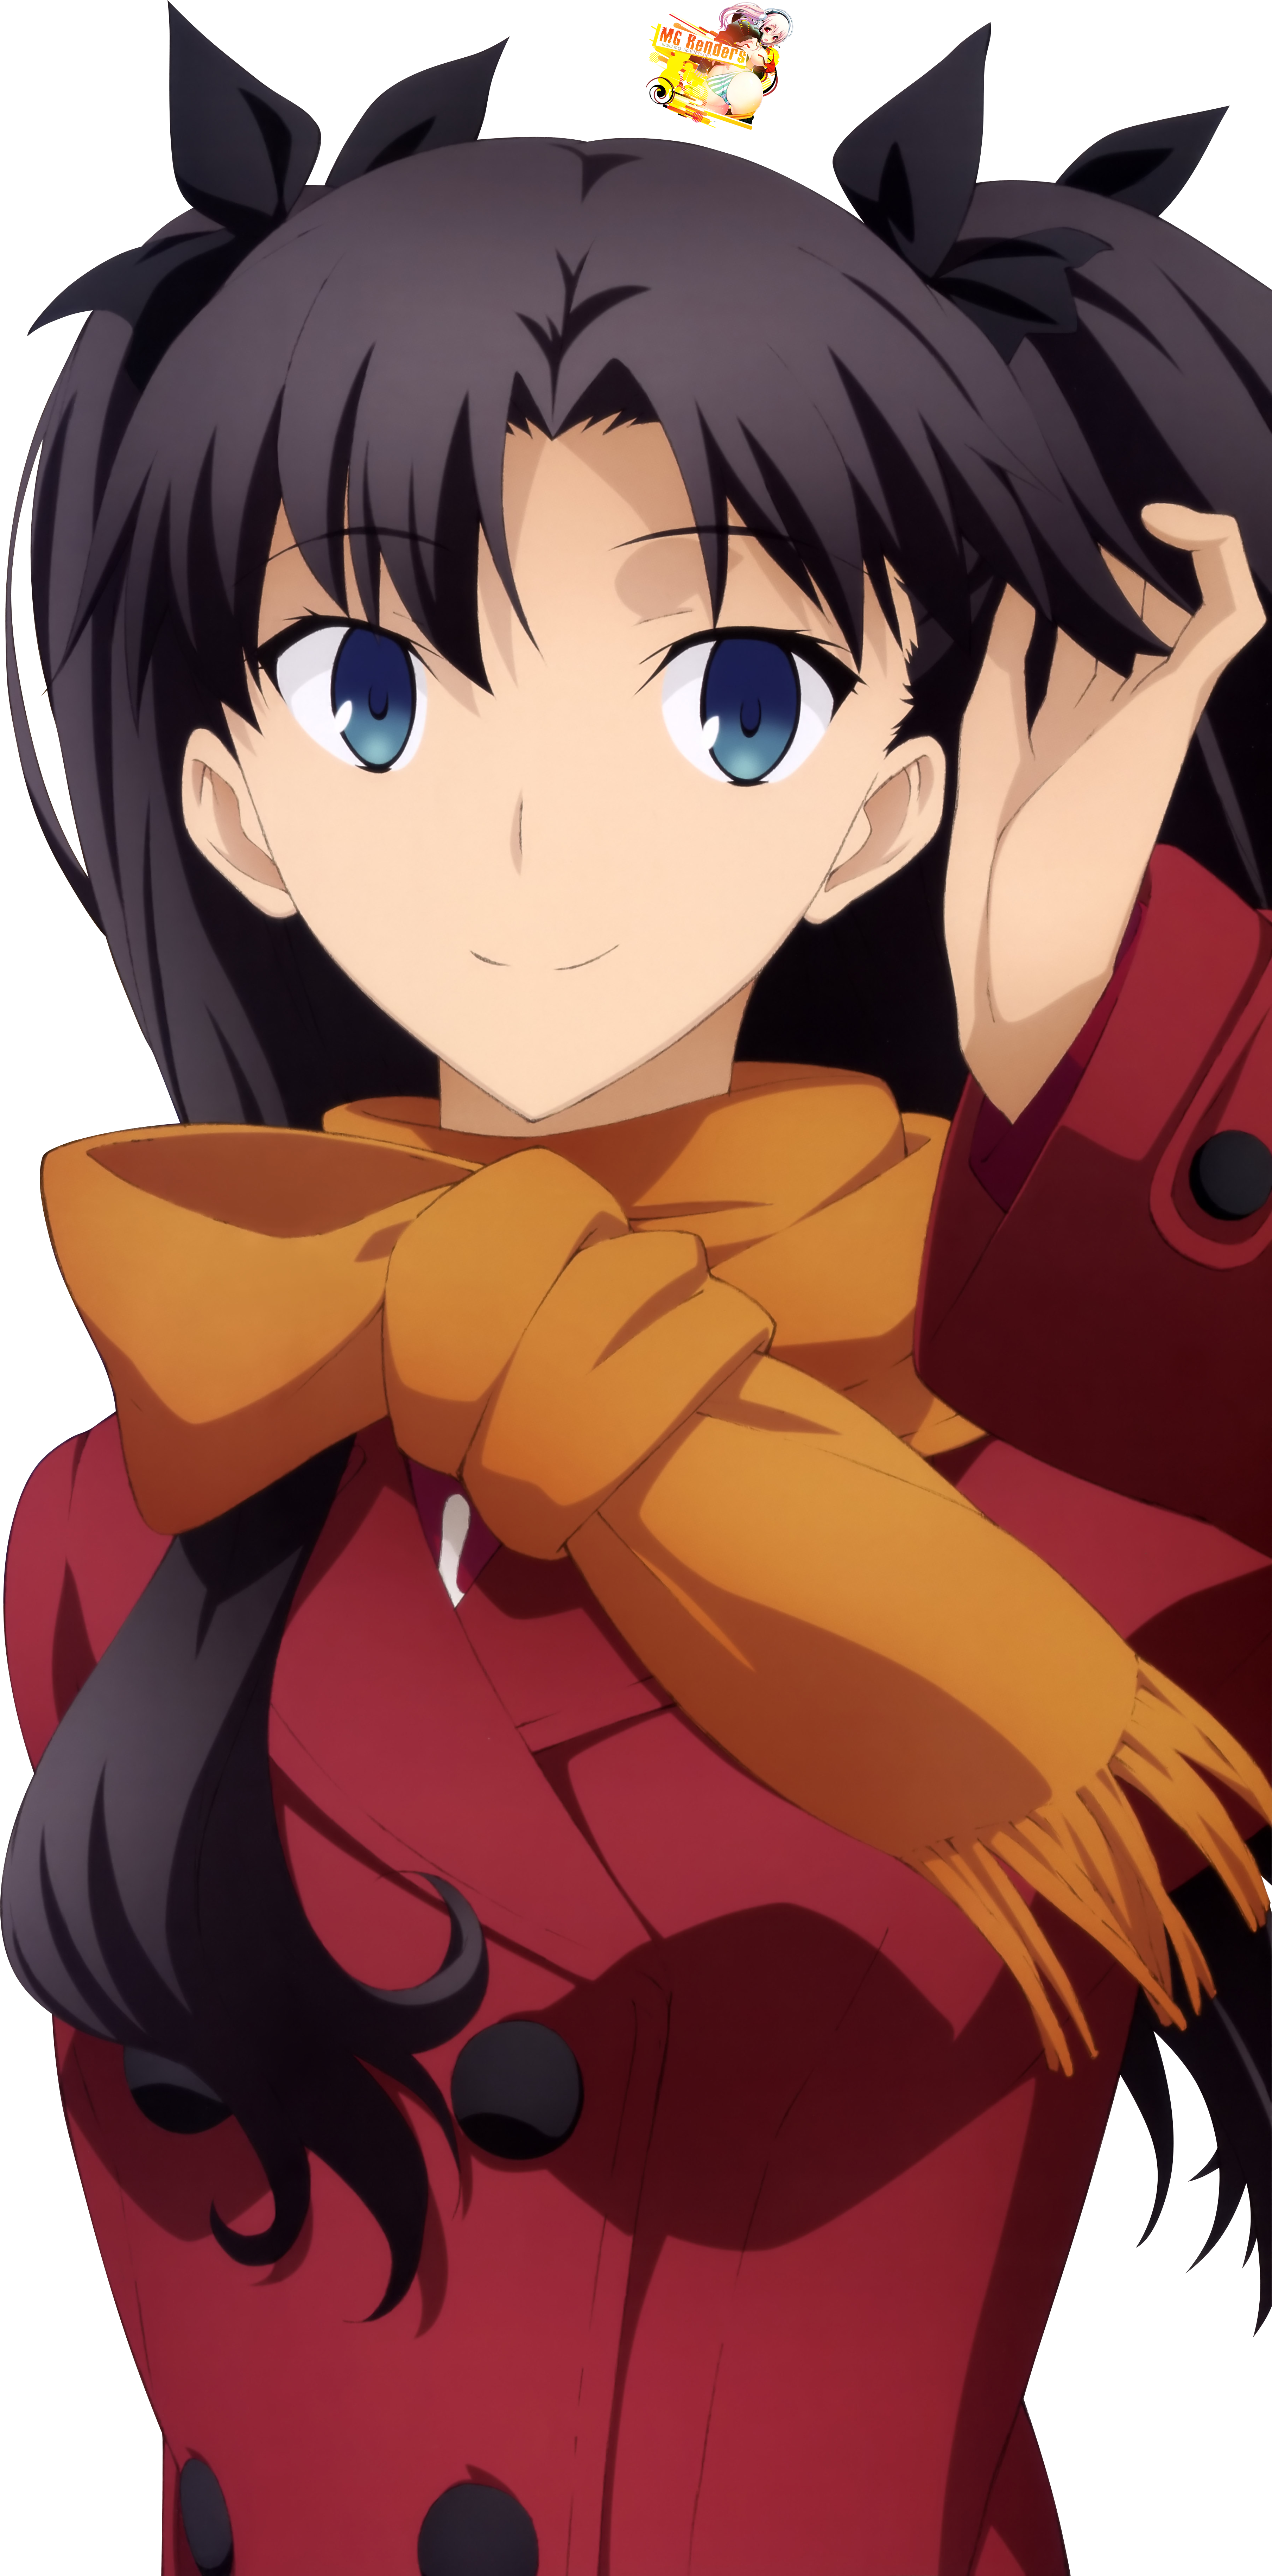 Fate/stay night - Tohsaka Rin Render 21 - Anime - PNG Image without